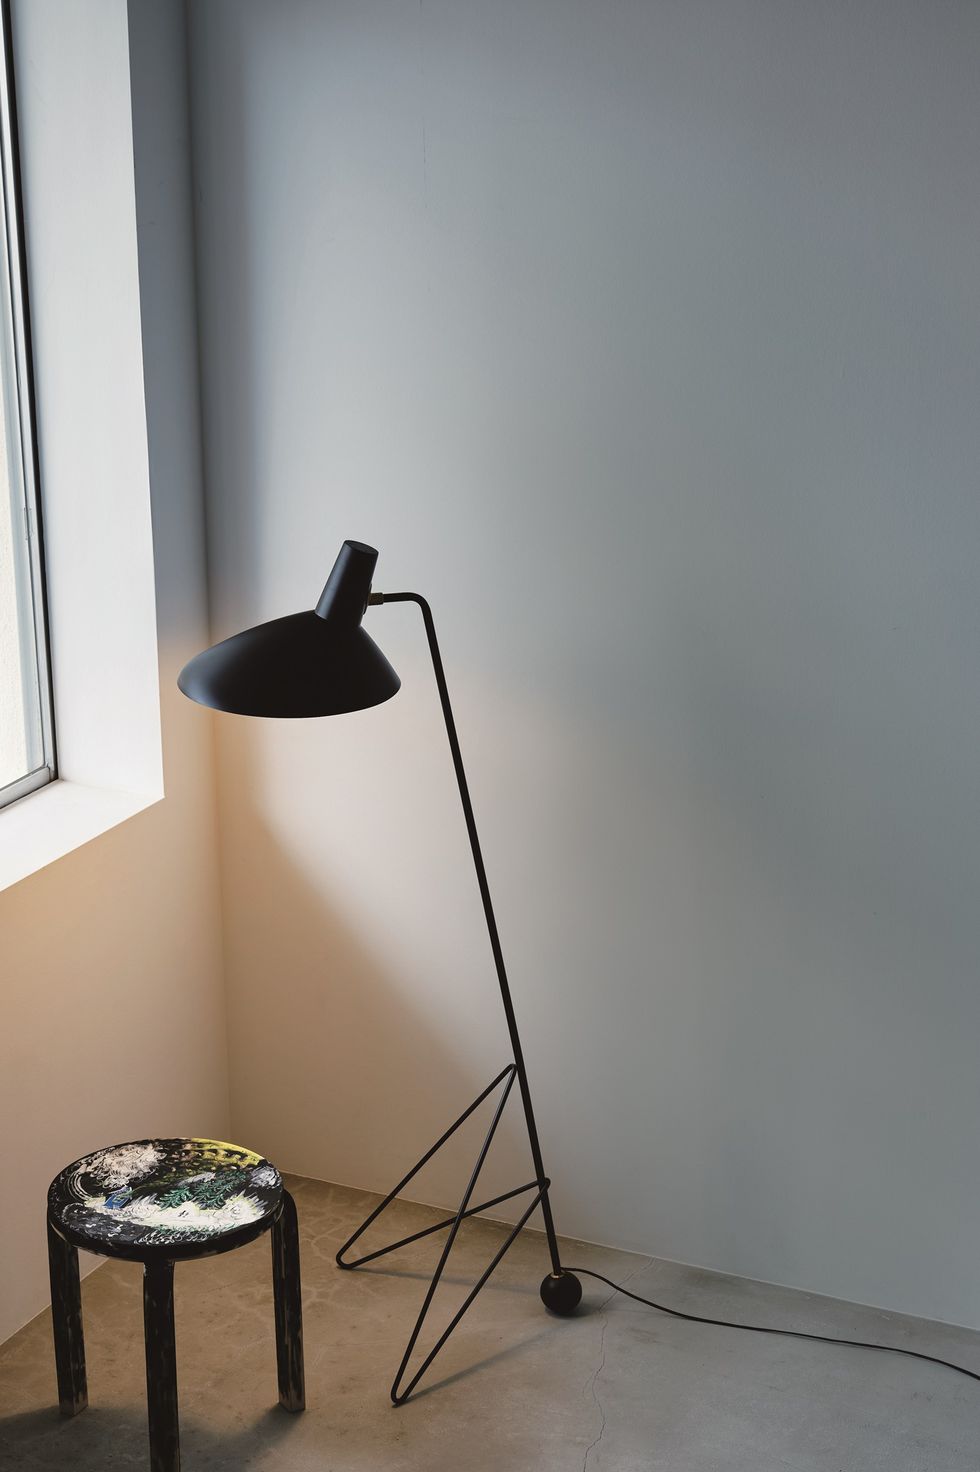 a lamp on a stand